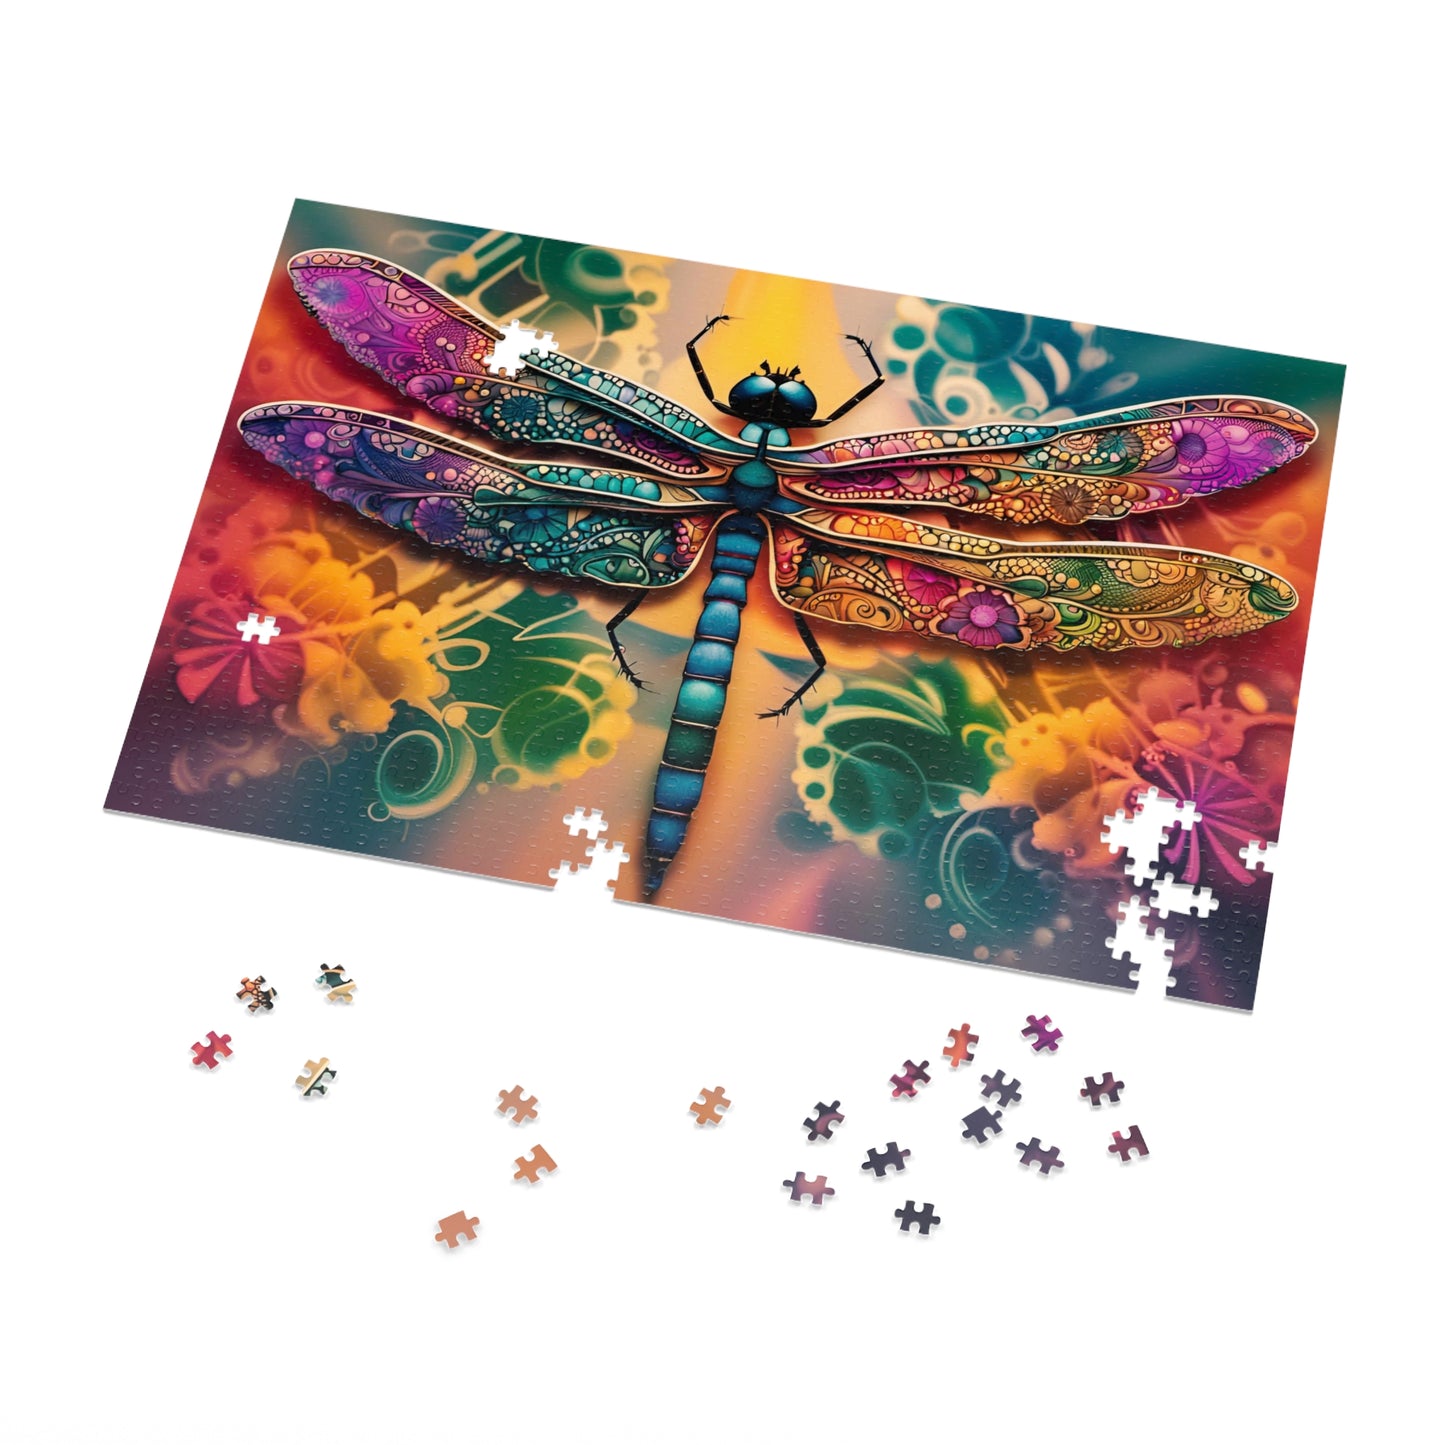 Dragonfly Themed Jigsaw Puzzle - Multicolor Psychedelic Dragonfly 1000 Pieces Puzzle in progress